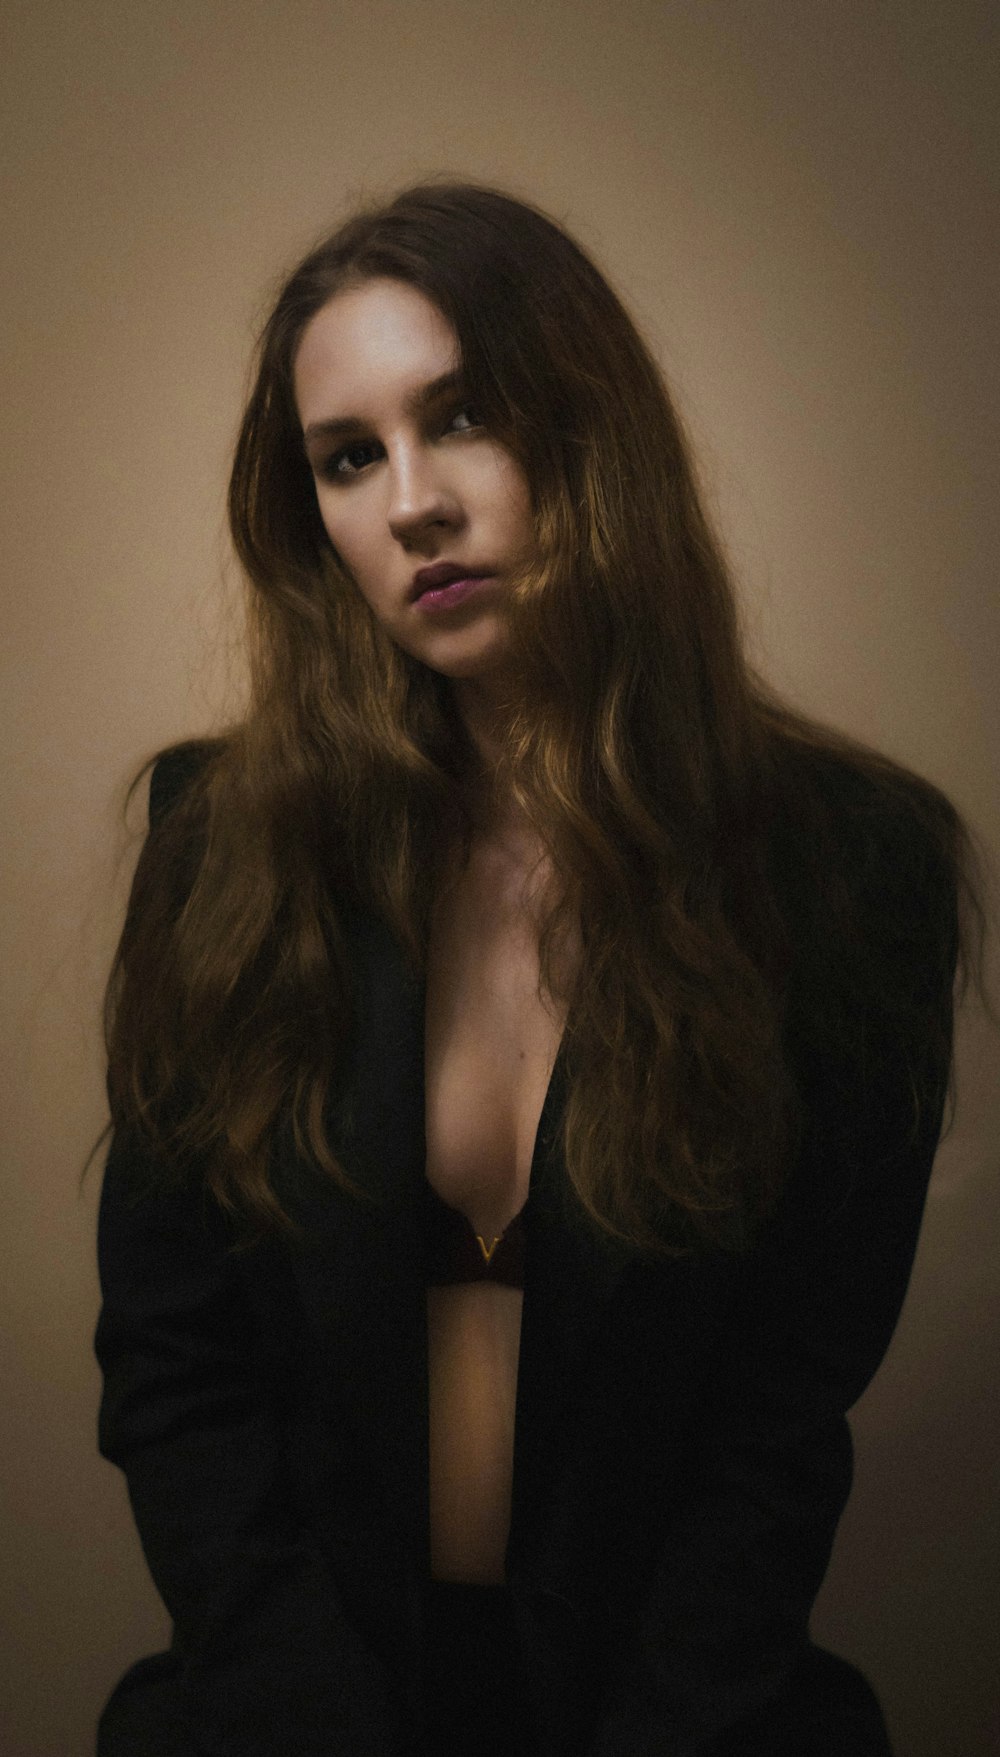 a woman with long brown hair wearing a black suit